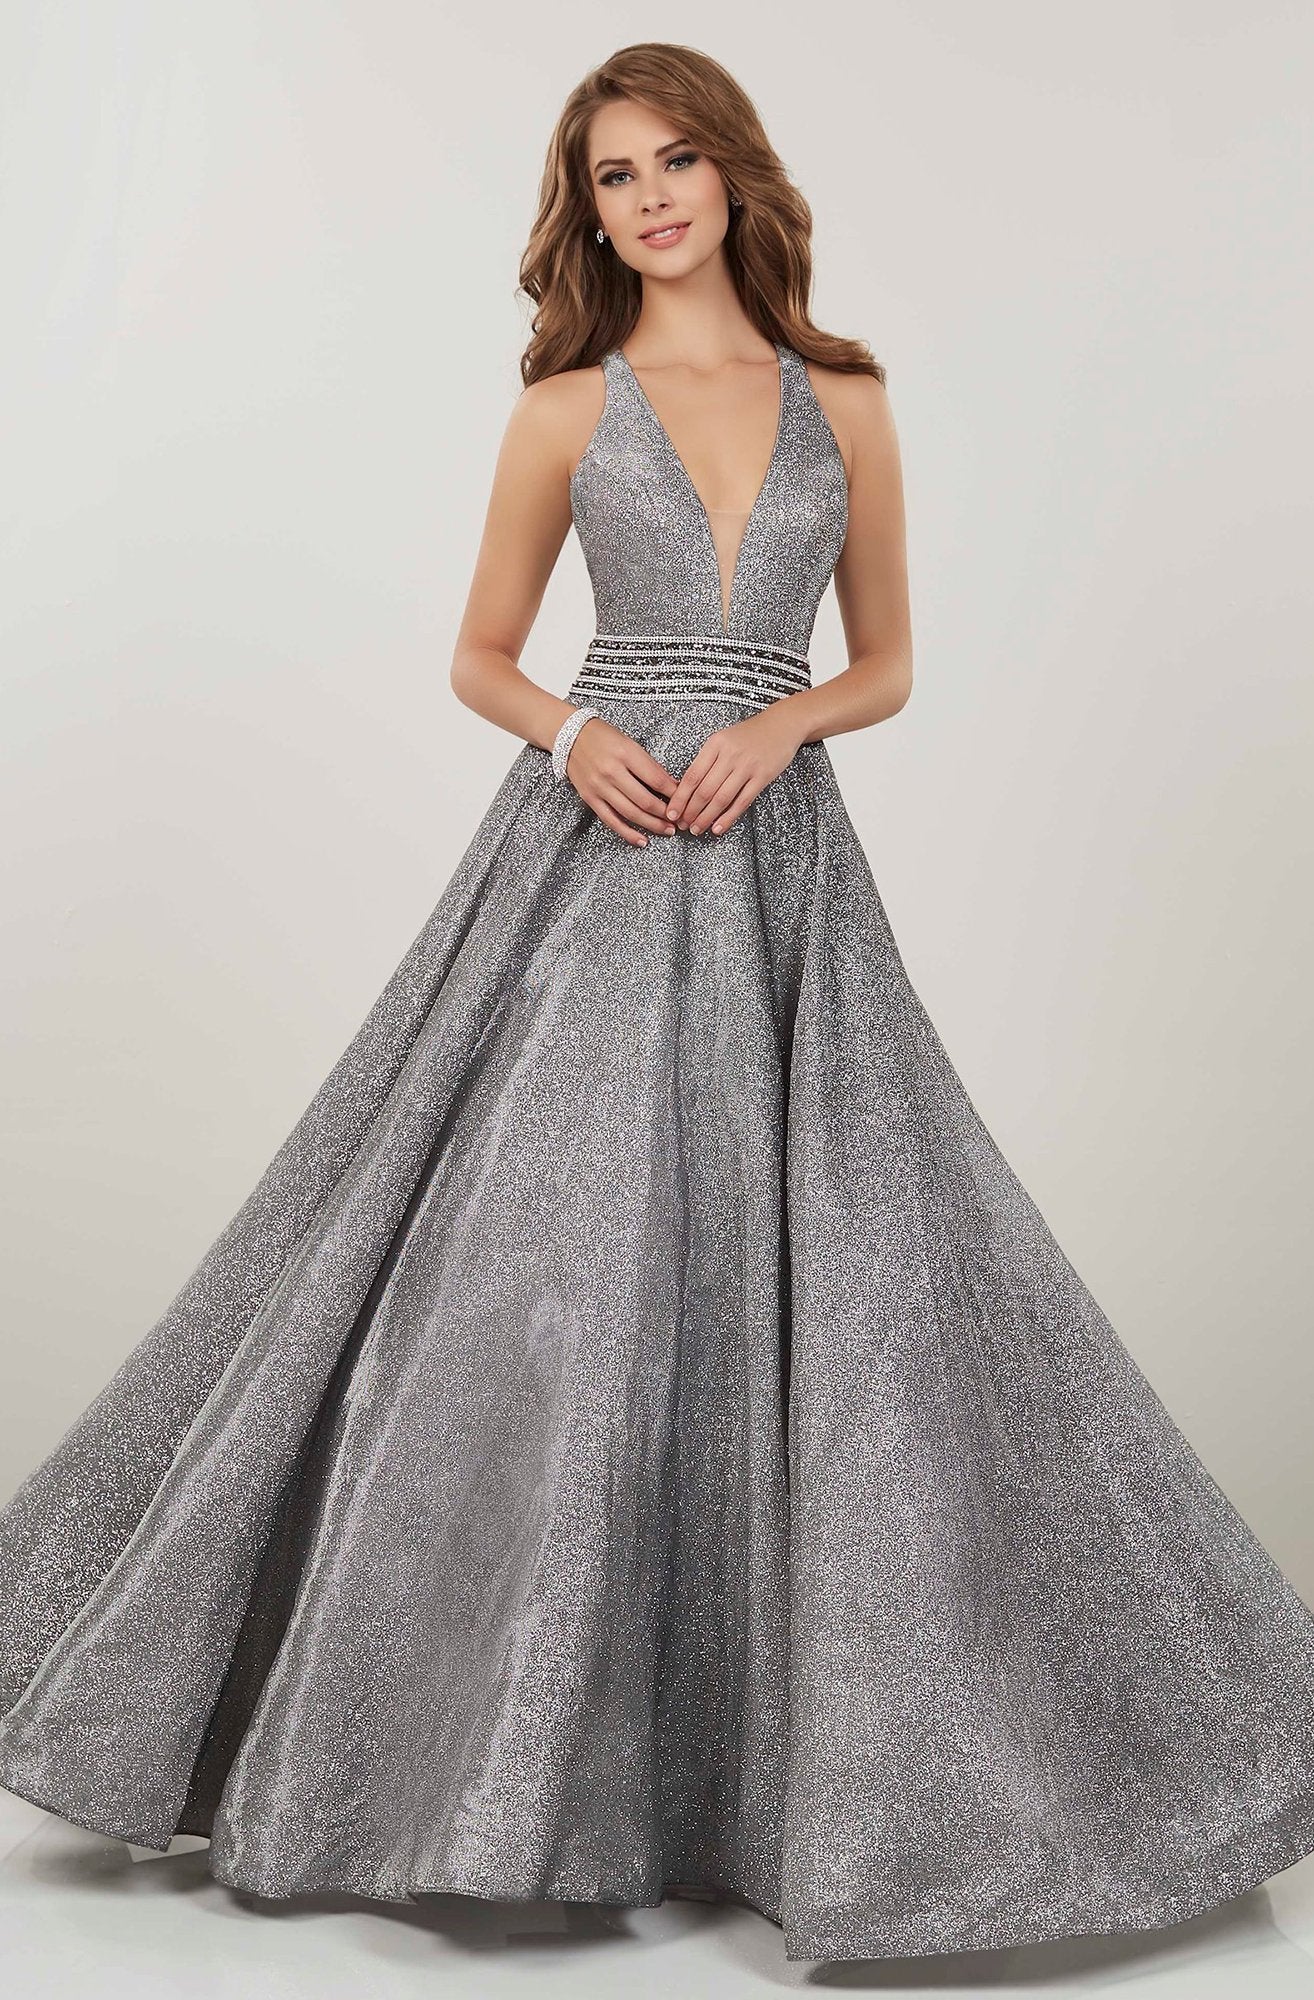 Panoply - 14926 Plunging V-Neck Embellished Ballgown In Gray